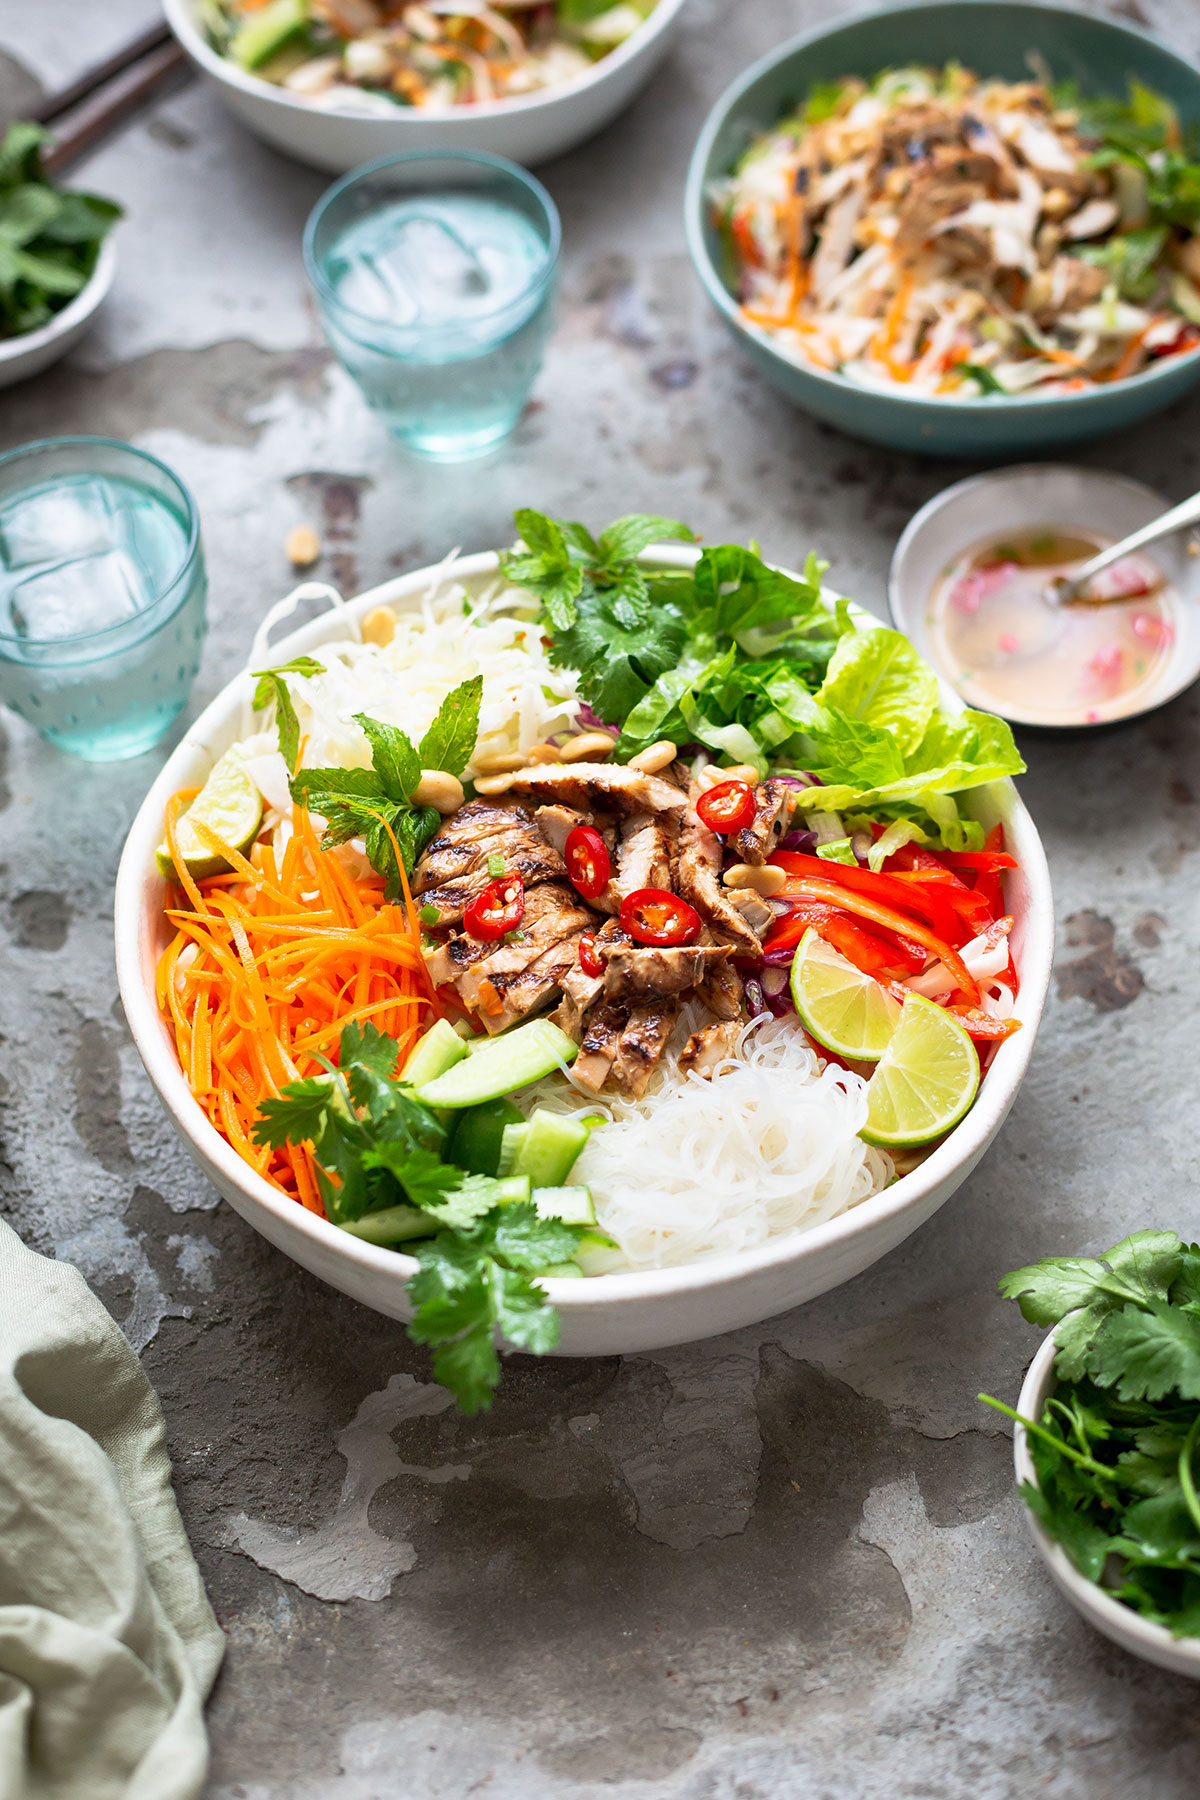 Vietnamese rice noodle salad with grilled chicken recipe in a bowl with garnishes and nuoc cham dressing.